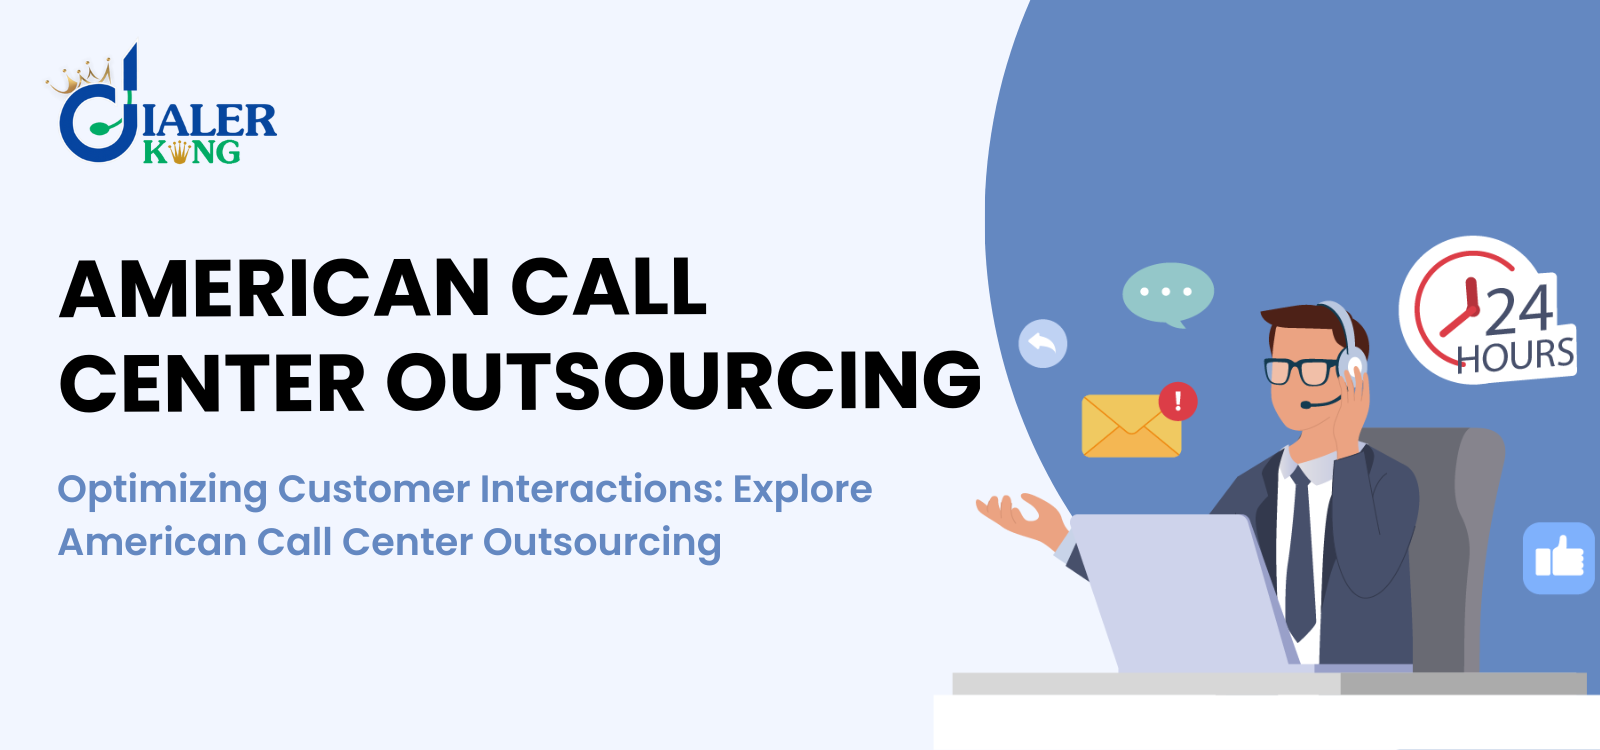 Optimizing-Customer-Interactions-Explore-American-Call-Center-Outsourcing